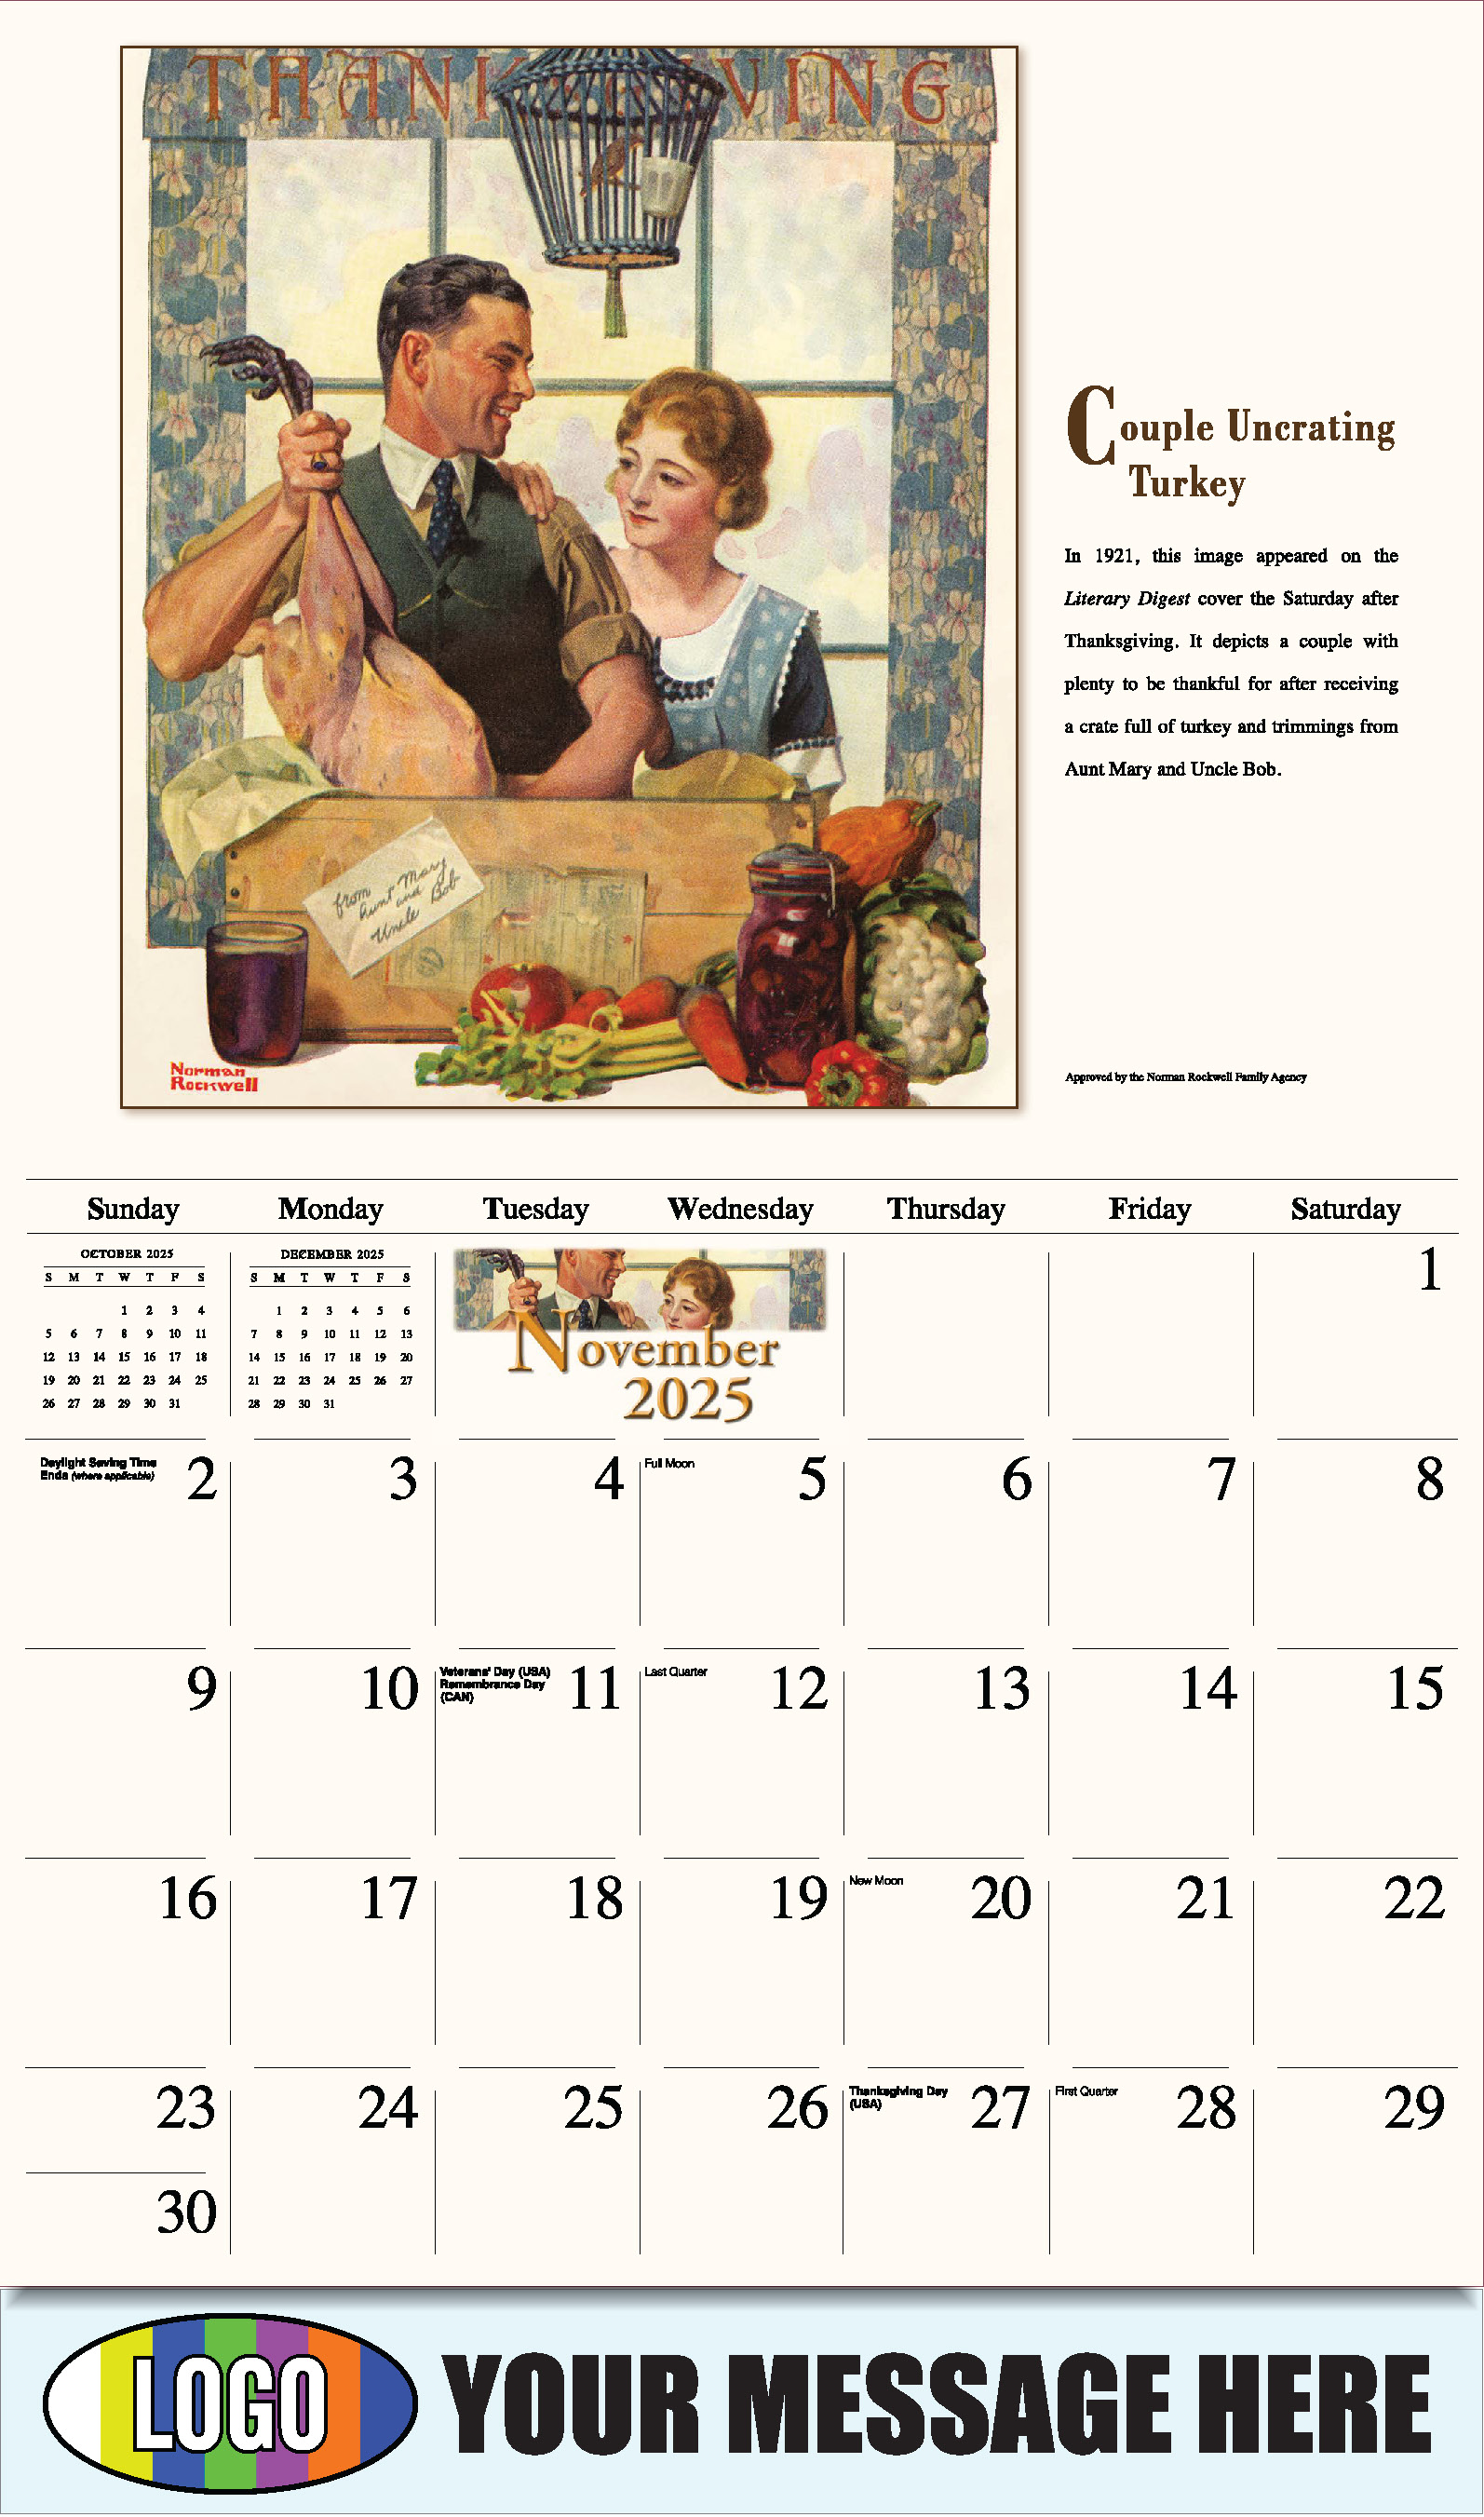 Memorable Images by Norman Rockwell 2025 Business Promotional Wall Calendar - November